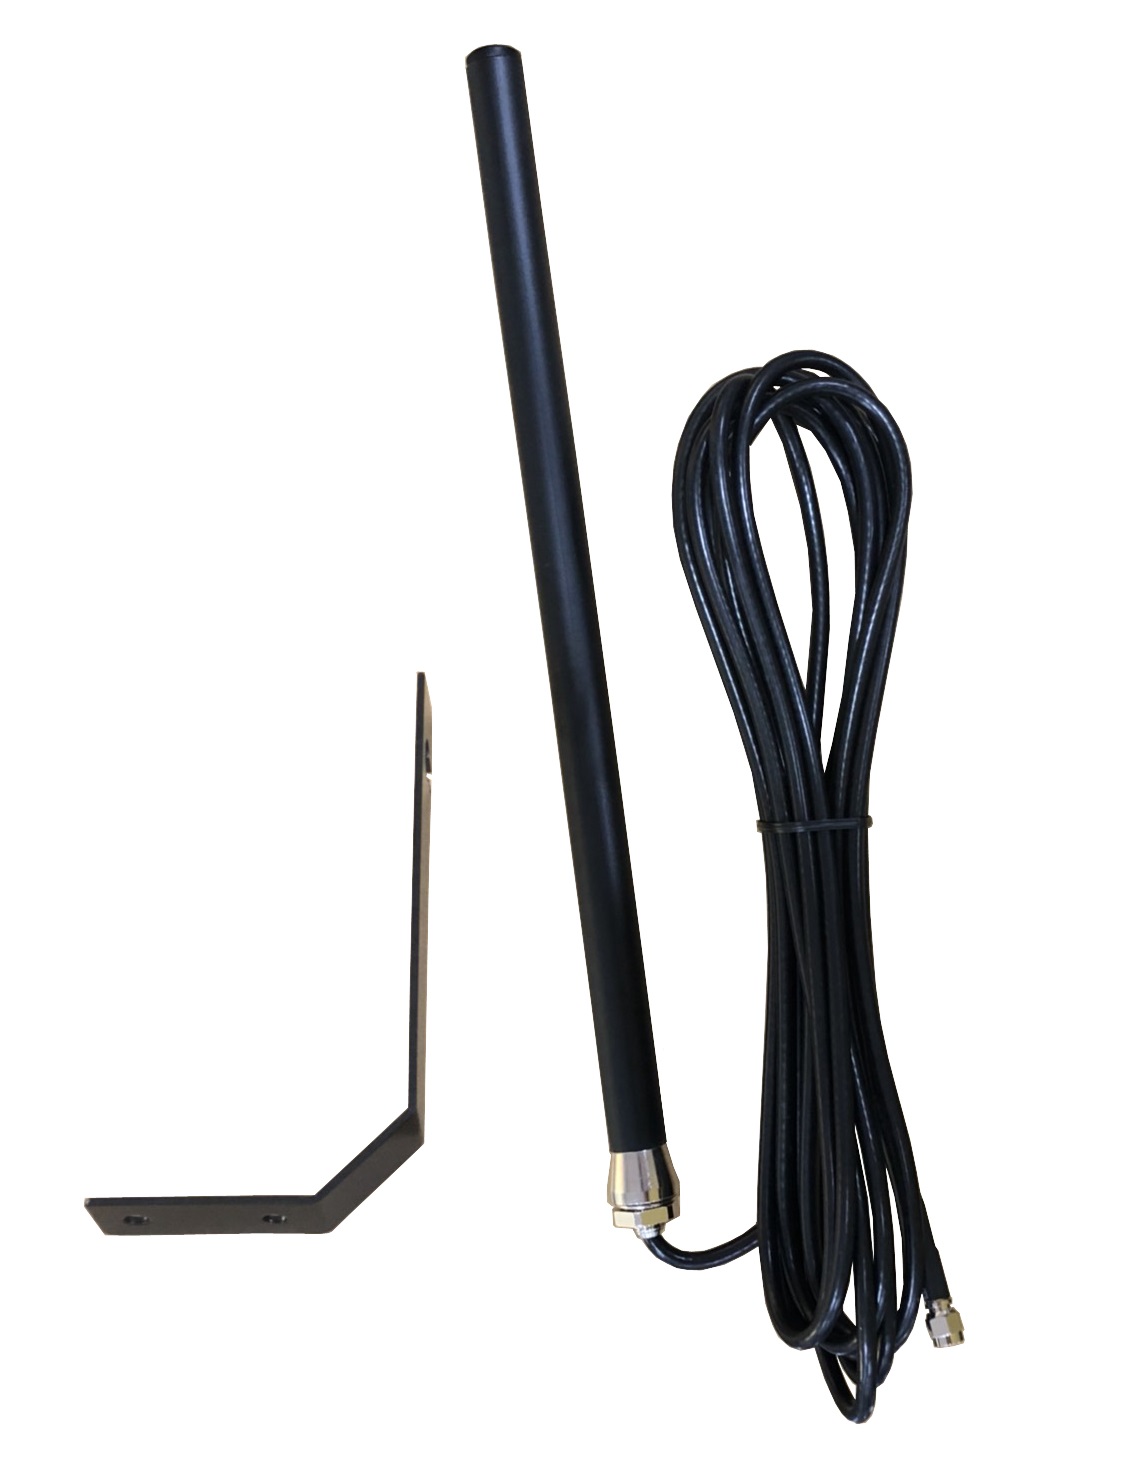 4x4 Pick Up OMNI Antenna for Body Parts System made by Chinmore Industry Co., LTD.　竣茂工業有限公司 - MatchSupplier.com